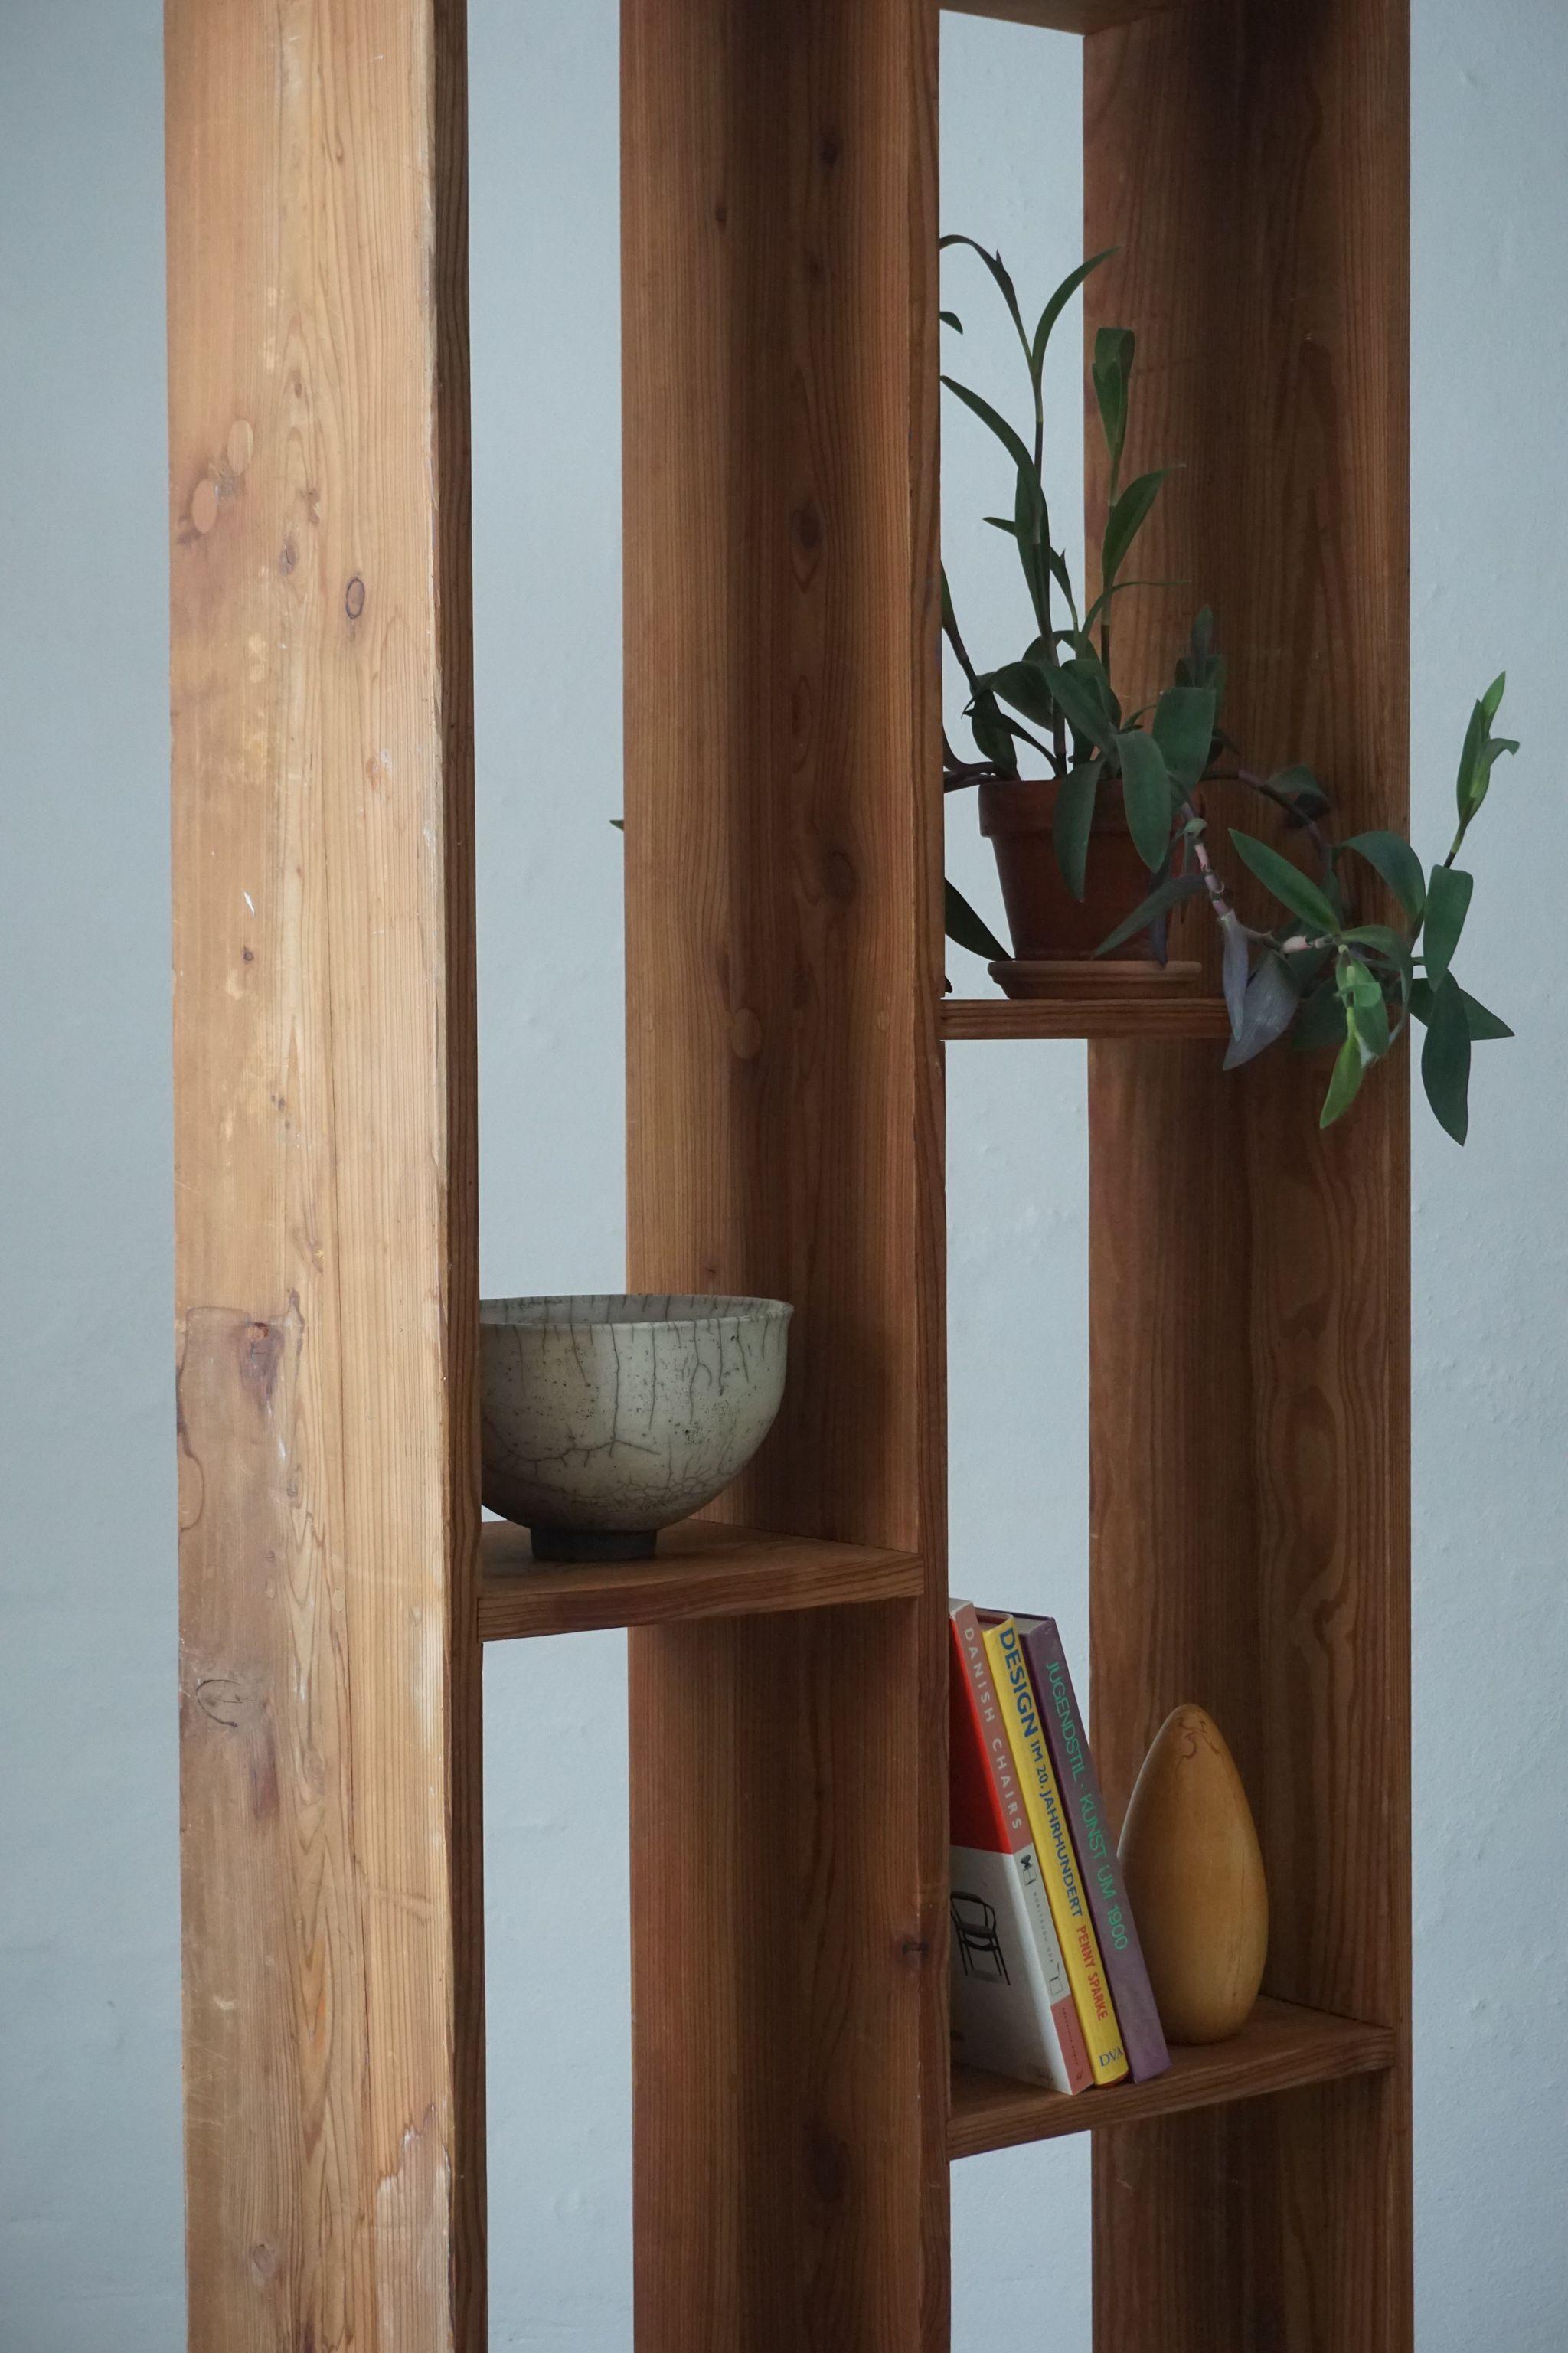 Danish vintage room divider/shelve in pine, 1970s.
Nicely patinated. A sculptural furniture.

Honorable mentions in similar style include Roland Wilhelmsson, Pierre Chapo, and Axel Einar Hjorth.